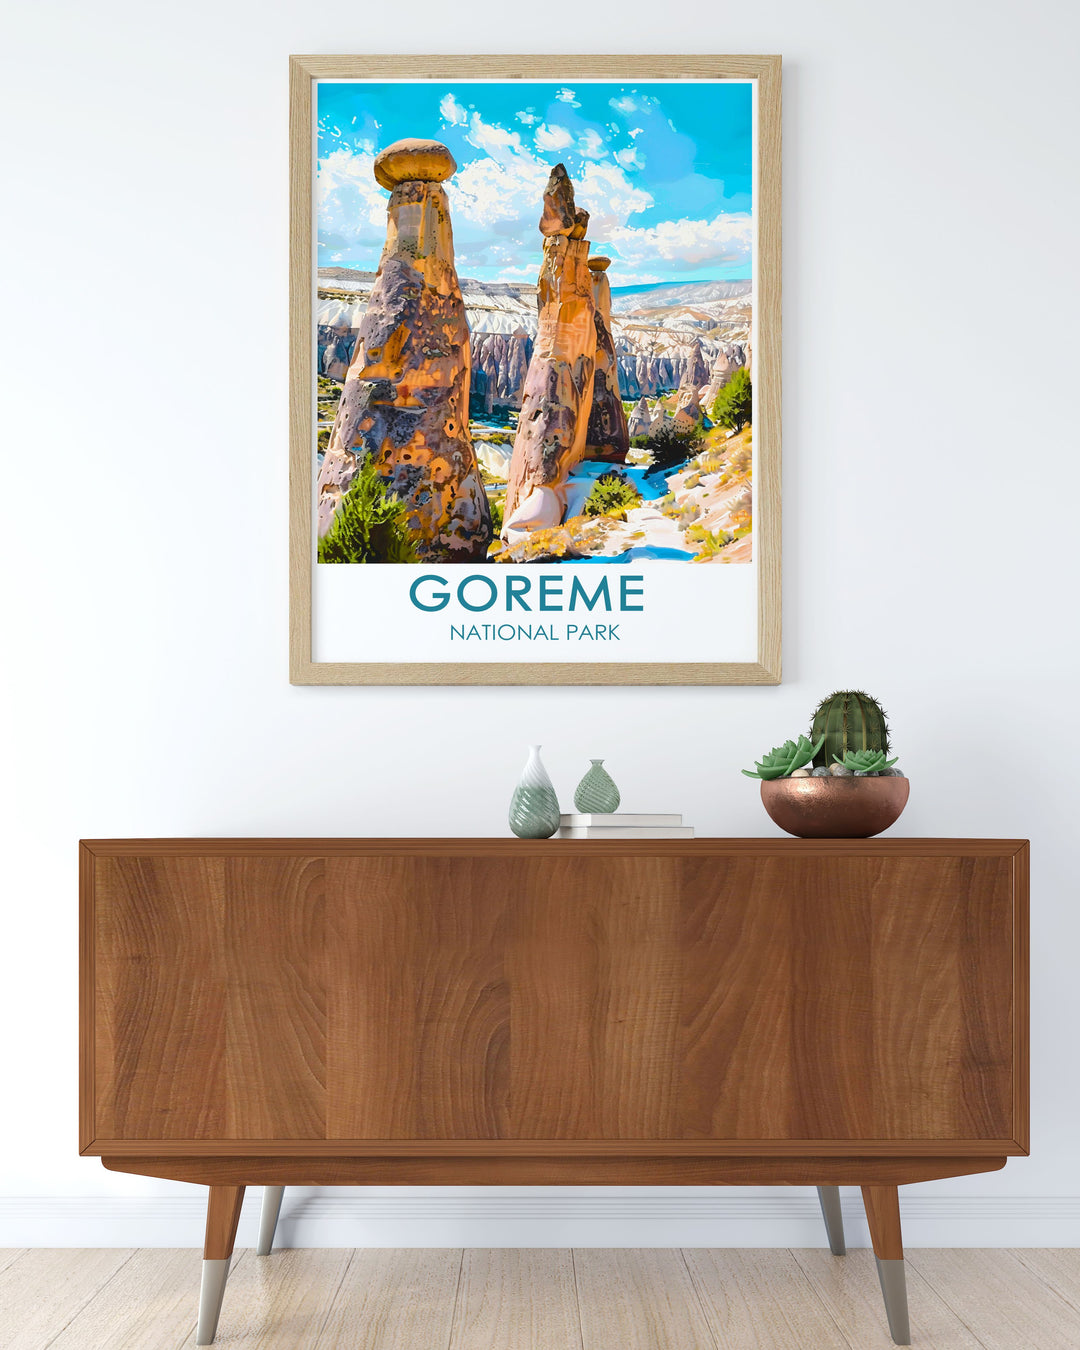 This travel poster captures the enchanting landscape of Goreme National Park in Turkey, showcasing the unique Fairy Chimneys and colorful hot air balloons drifting over the magical terrain, perfect for adding a touch of exotic charm to your home decor.